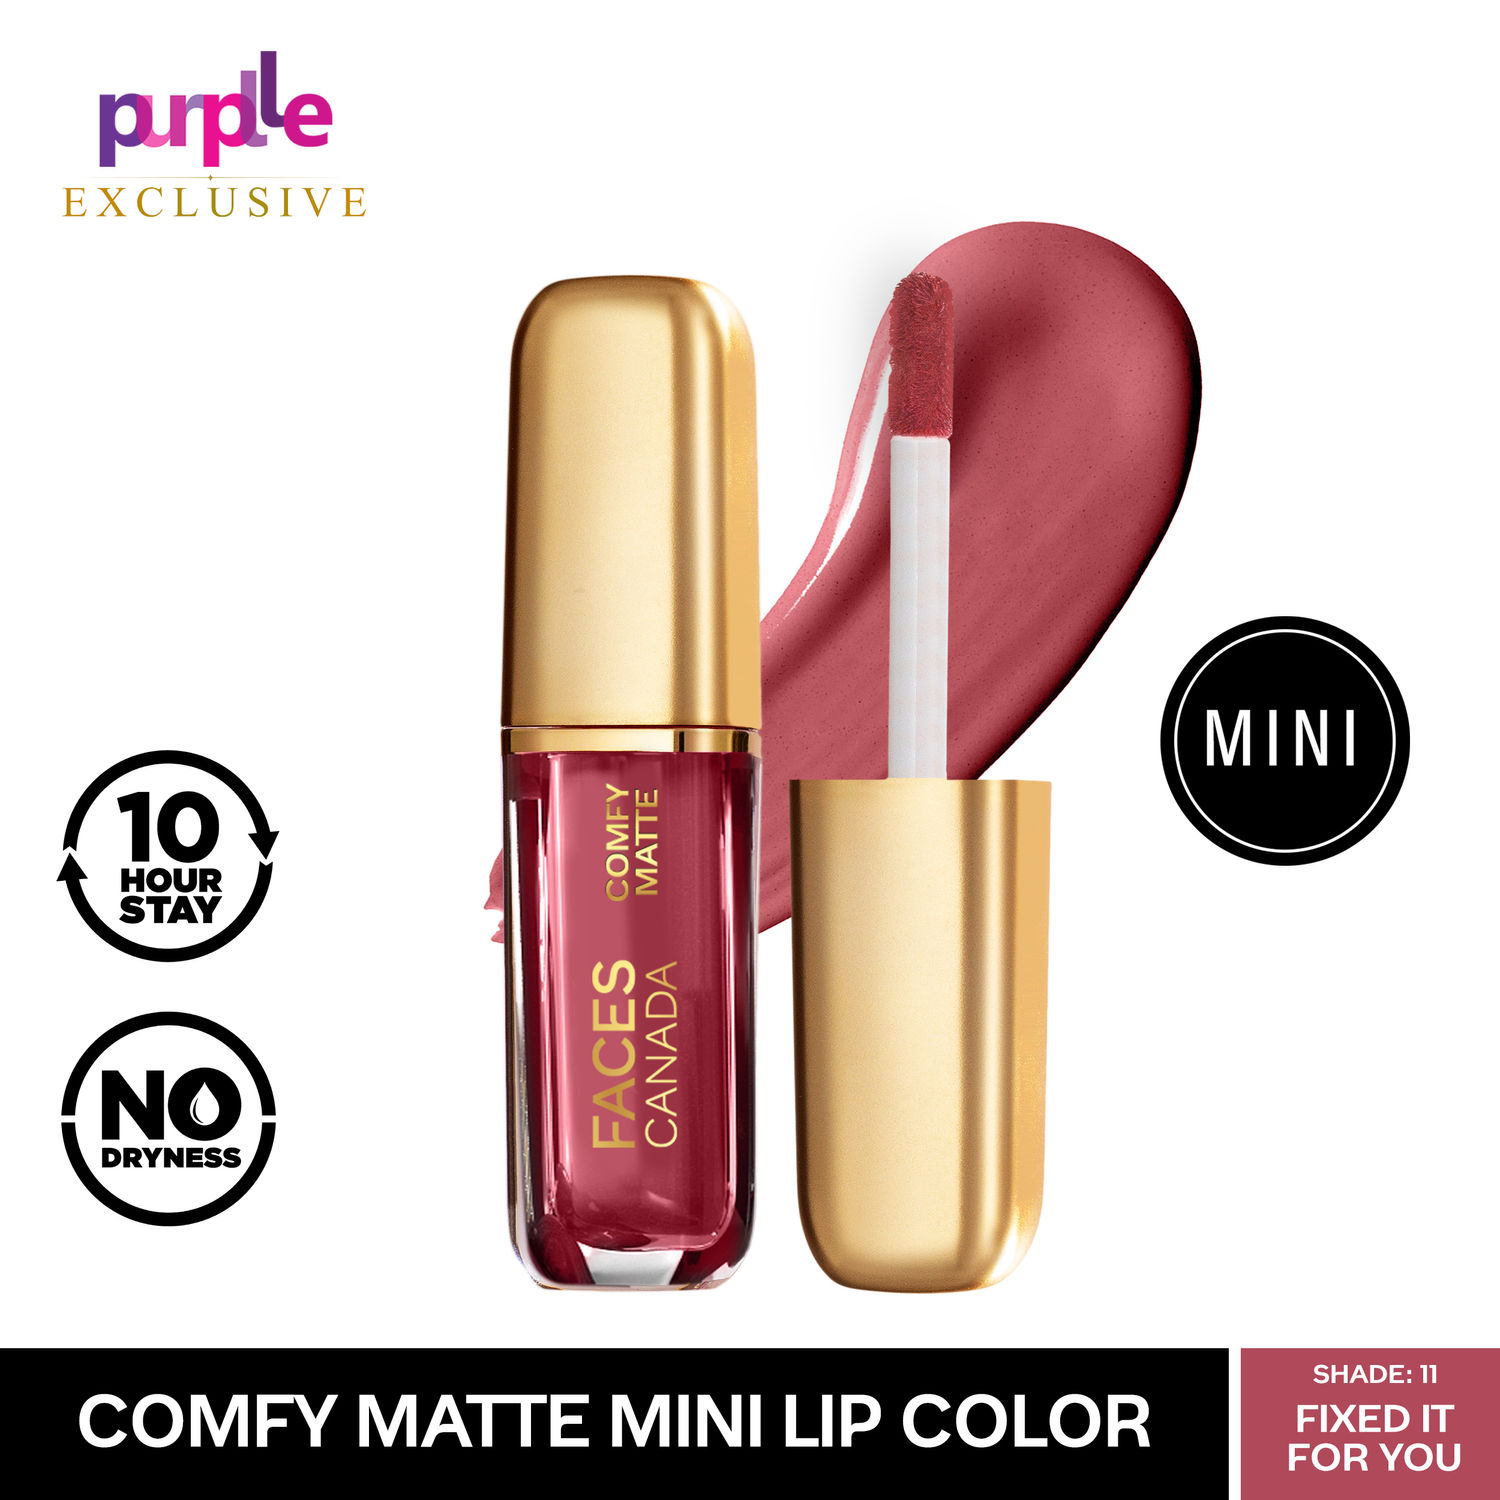 Faces Canada Comfy Matte Mini Lip Color | Comfortable 10 Hours Longstay | Matte Finish | With Natural Oils | Fixed It For You 11 (1.2 ml) - Exclusively Only On Purplle